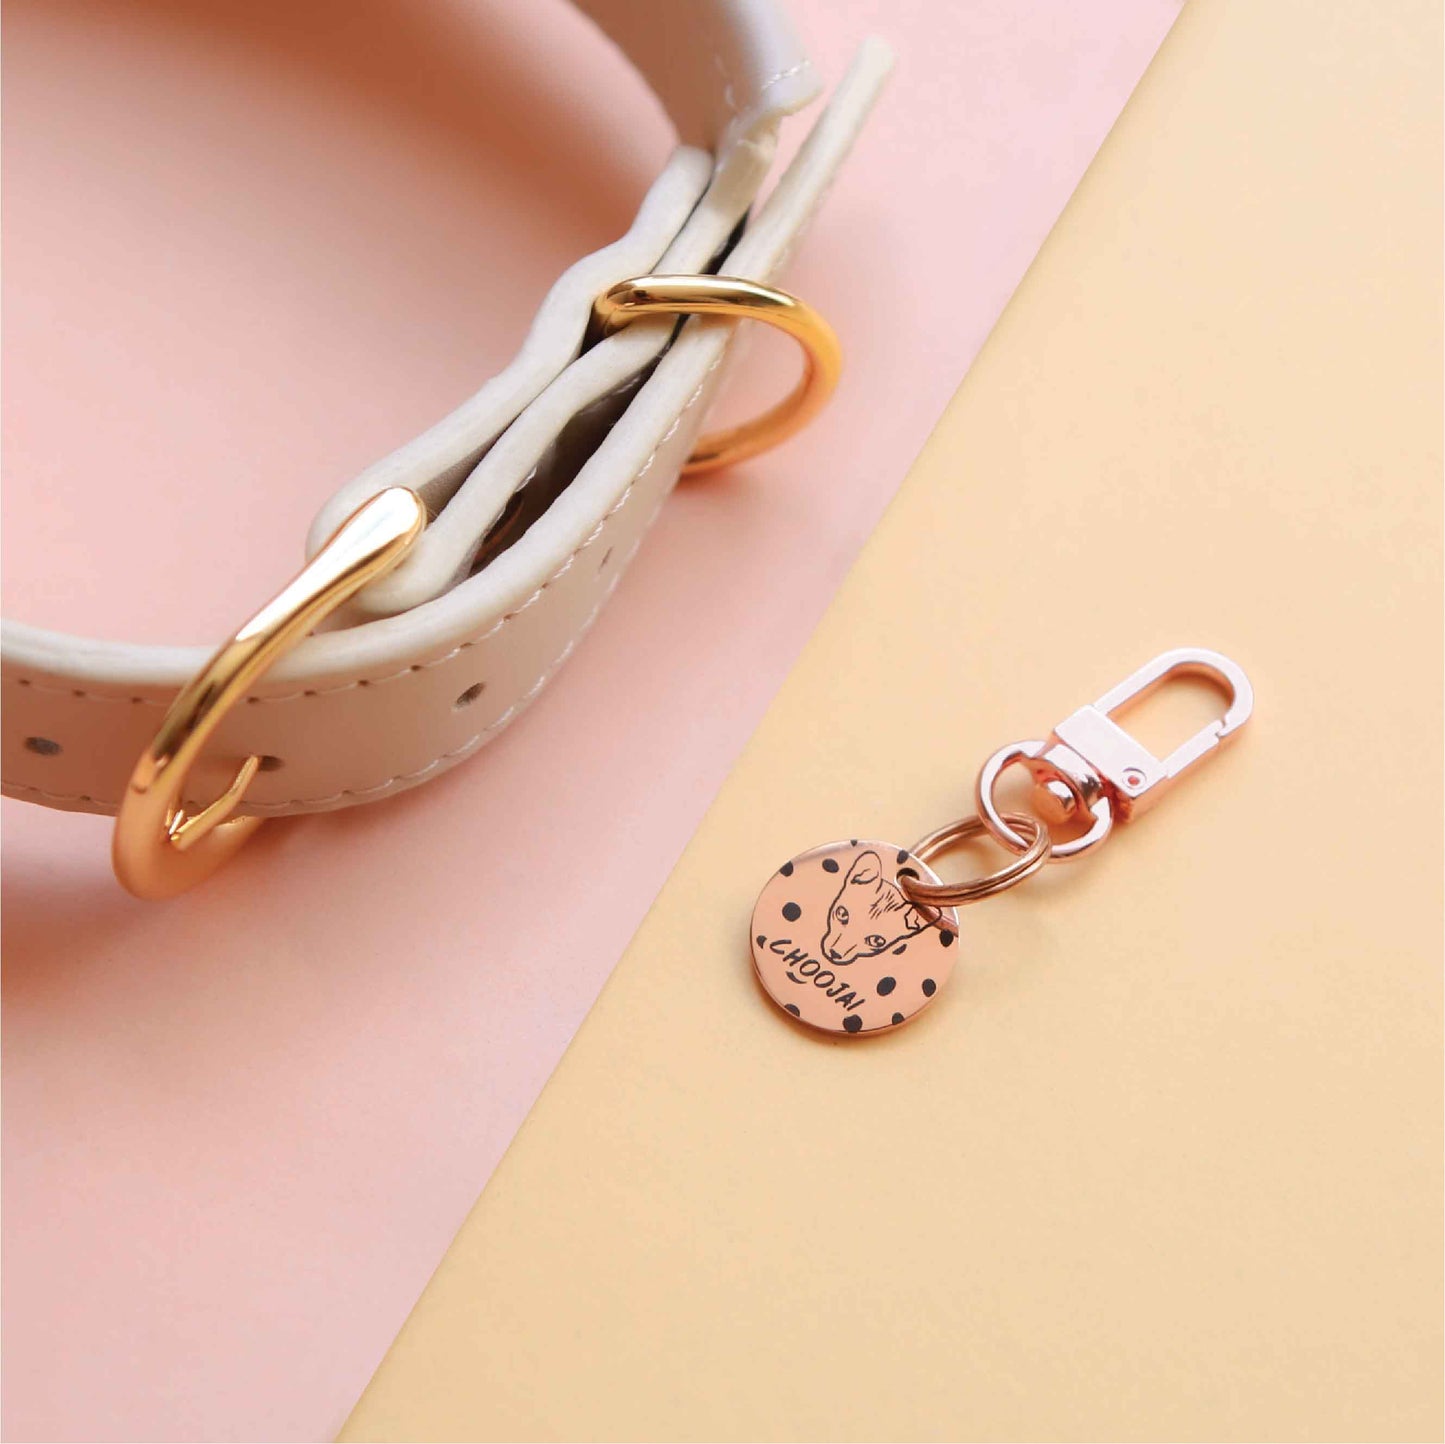 Pet ID tag rose gold stainless steel (THICK) easy hook Personalized engraved